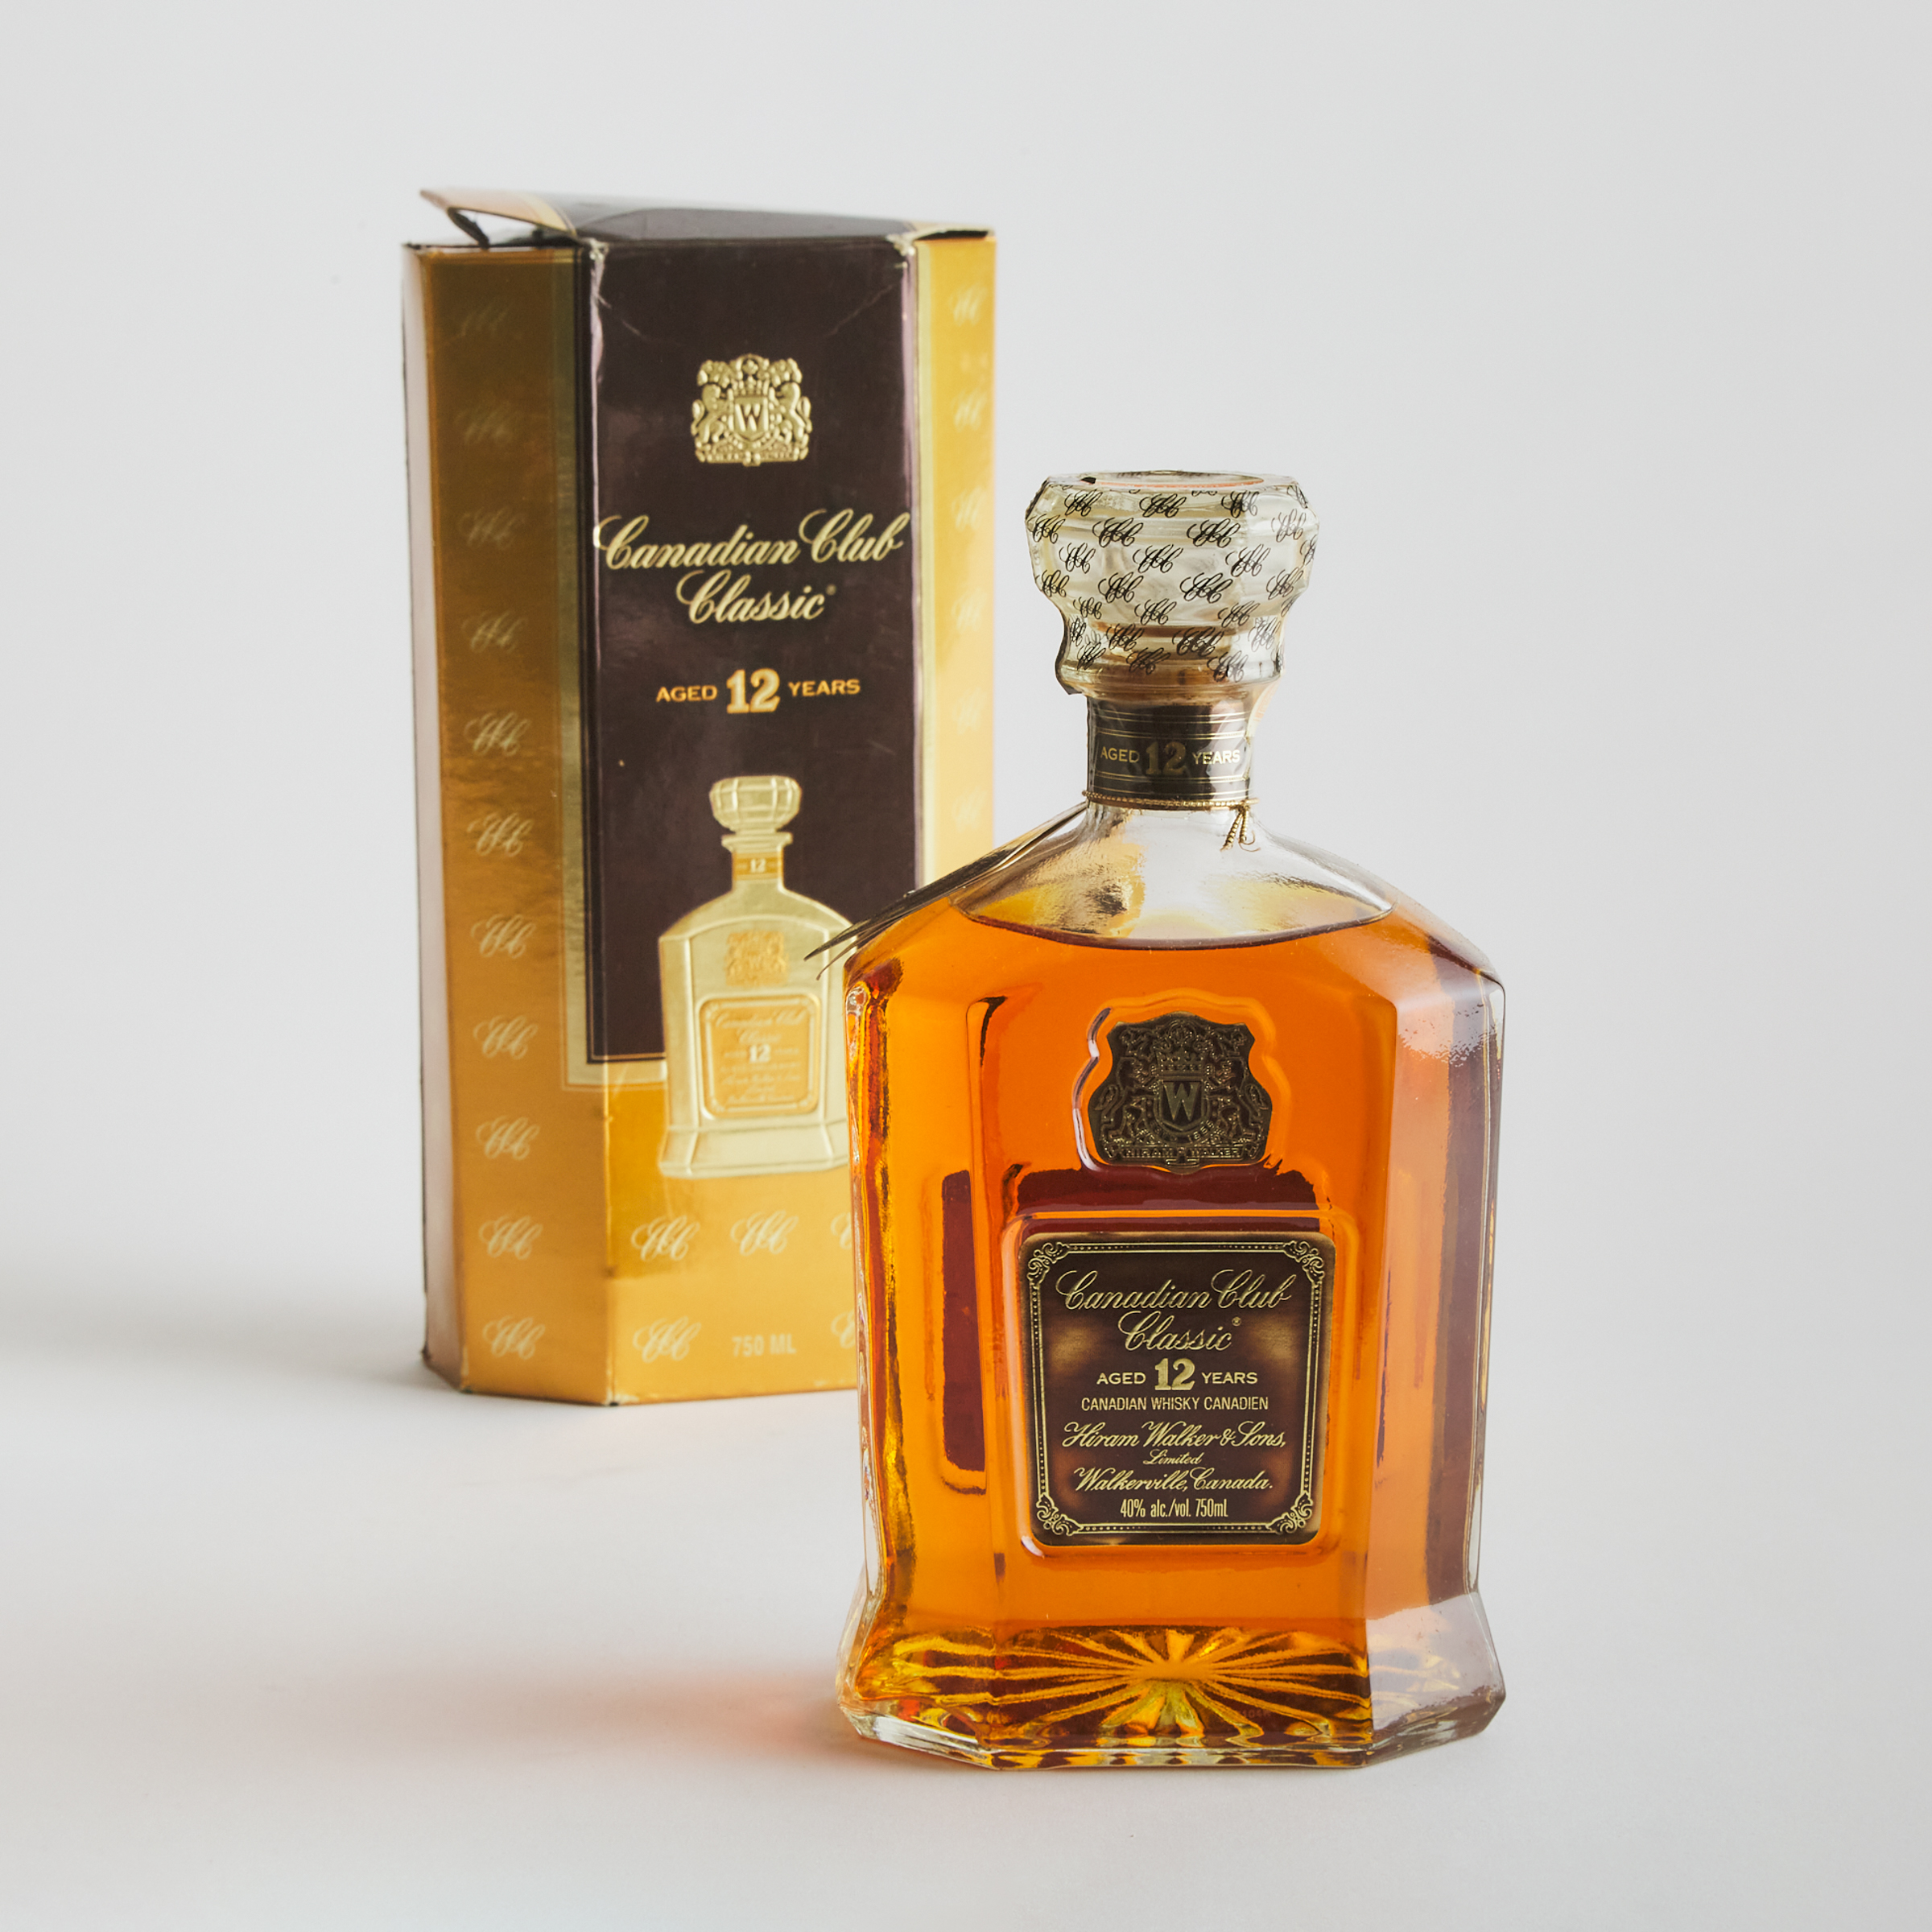 CANADIAN CLUB CLASSIC CANADIAN WHISKY 12 YEARS (ONE 750 ML)